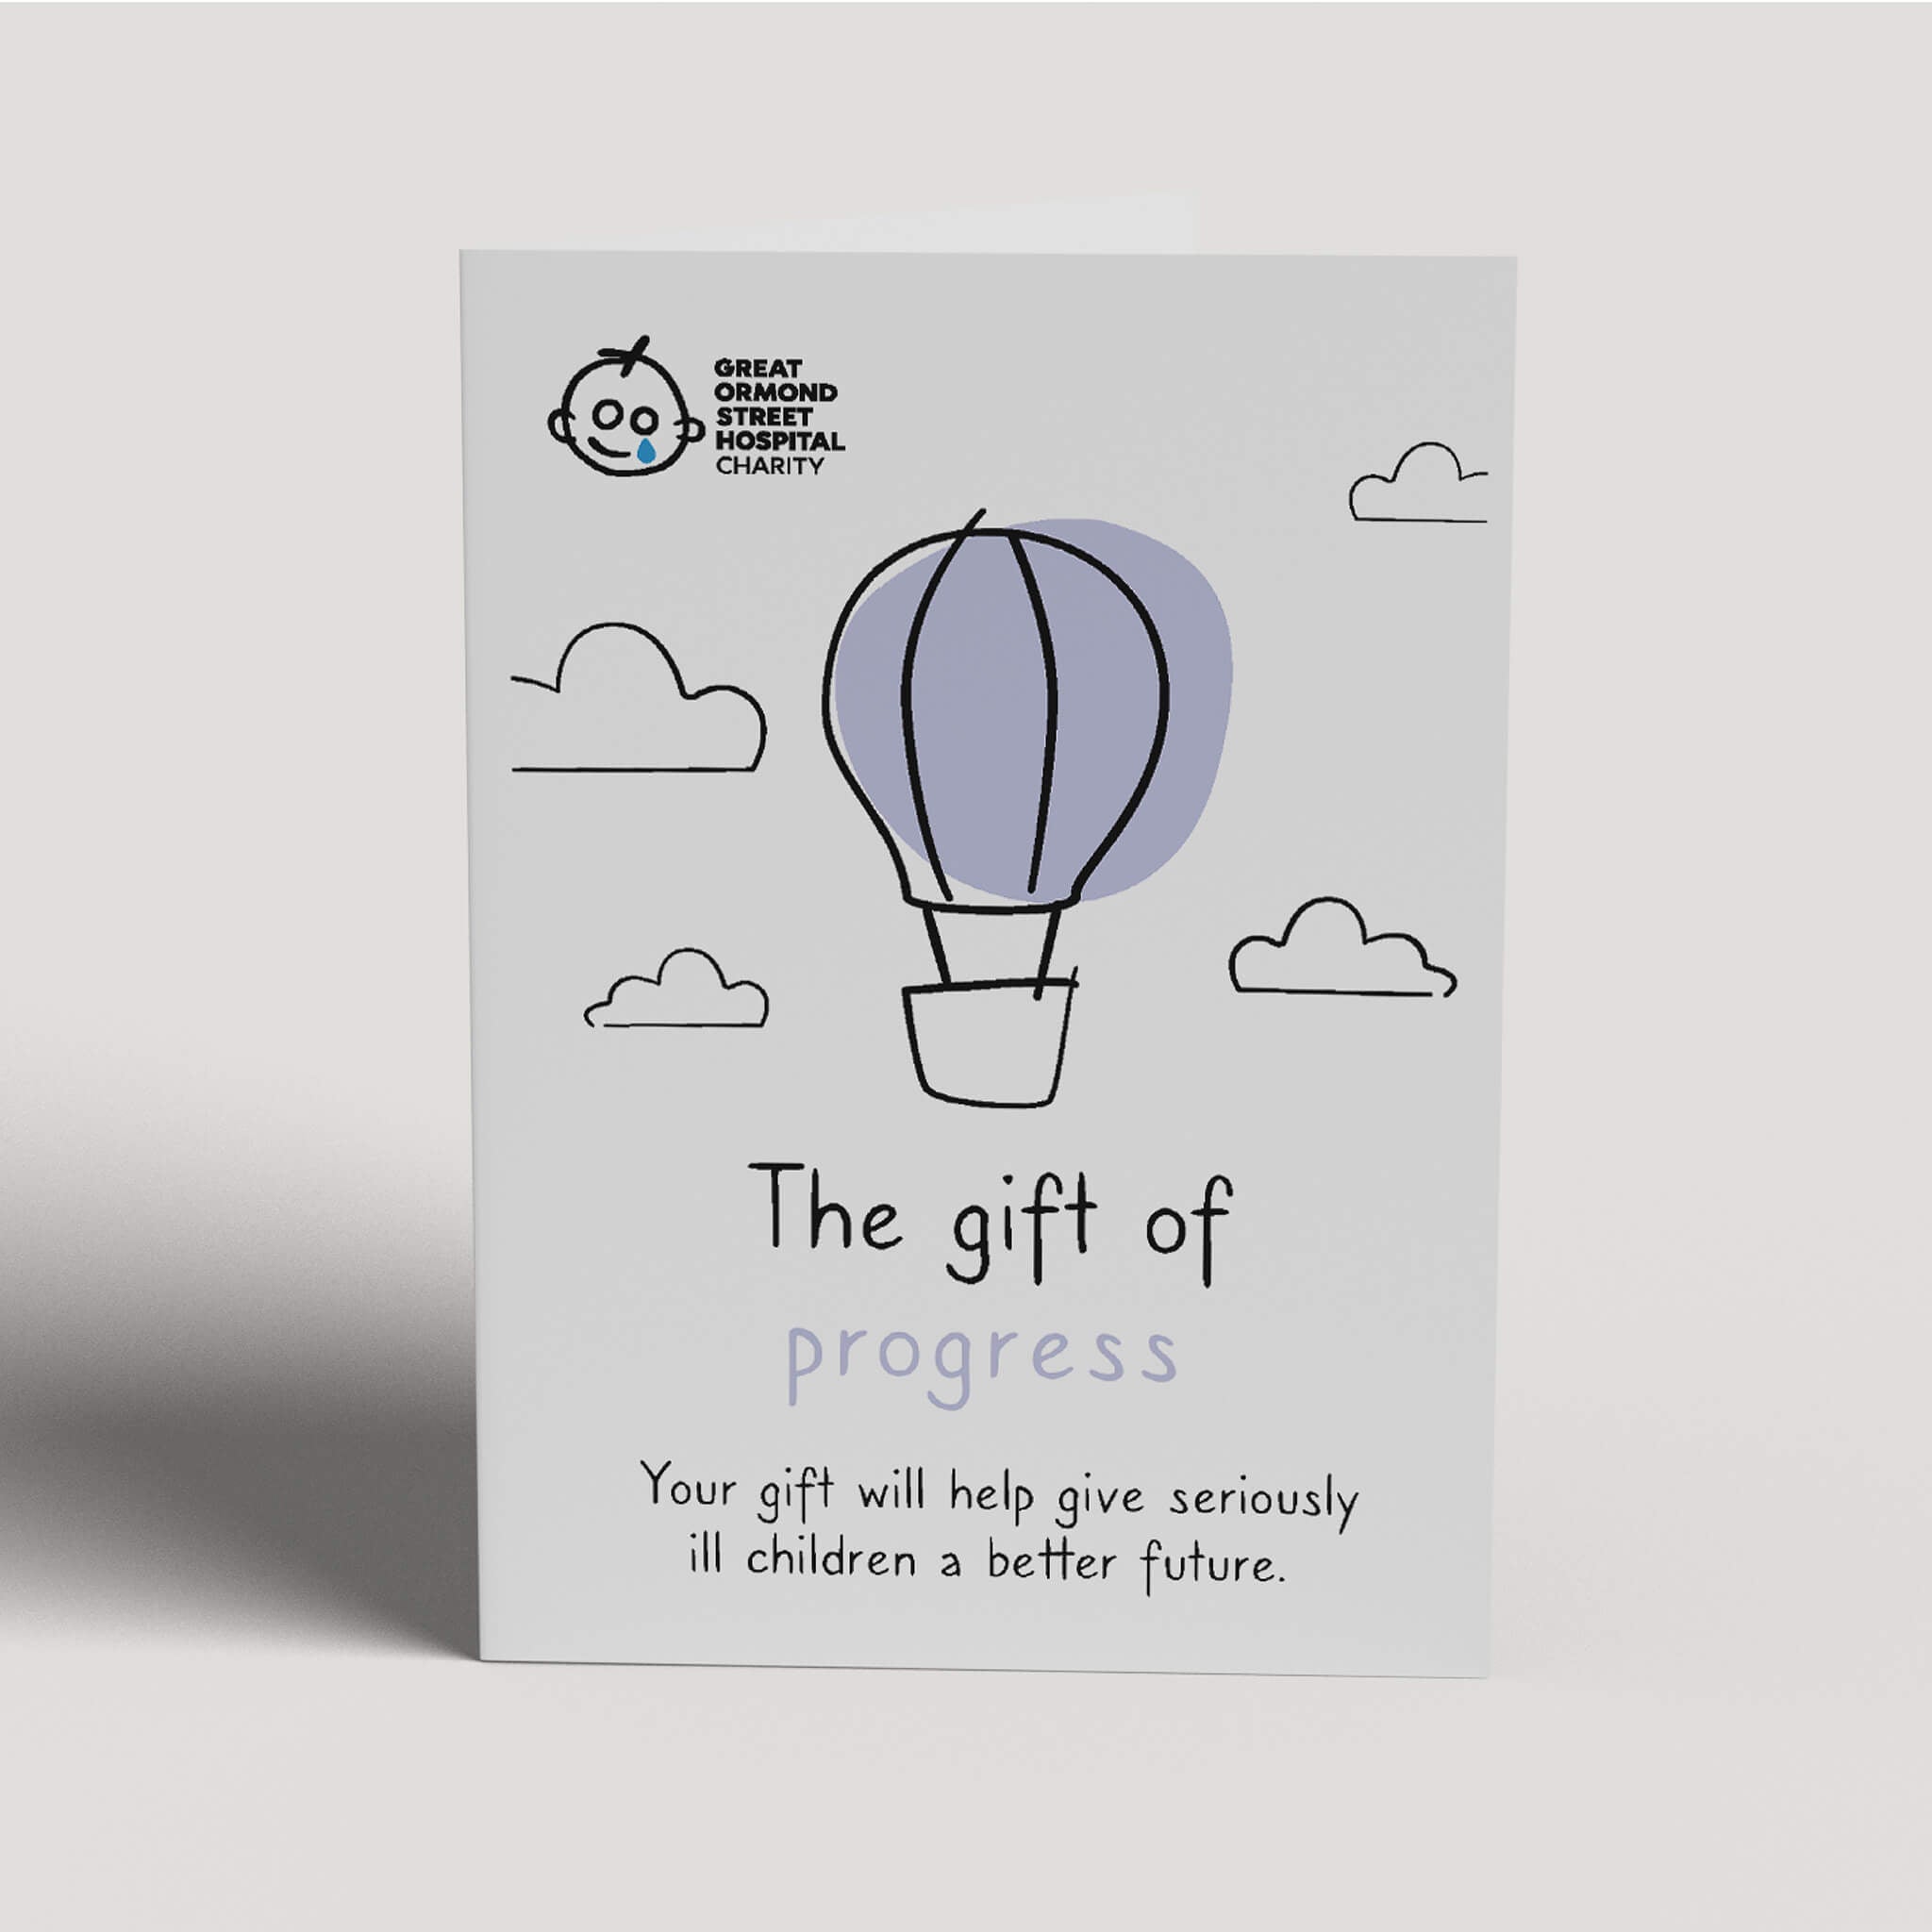 GOSH_Charity_alternative_gift_card_for_medical_equipment_donations